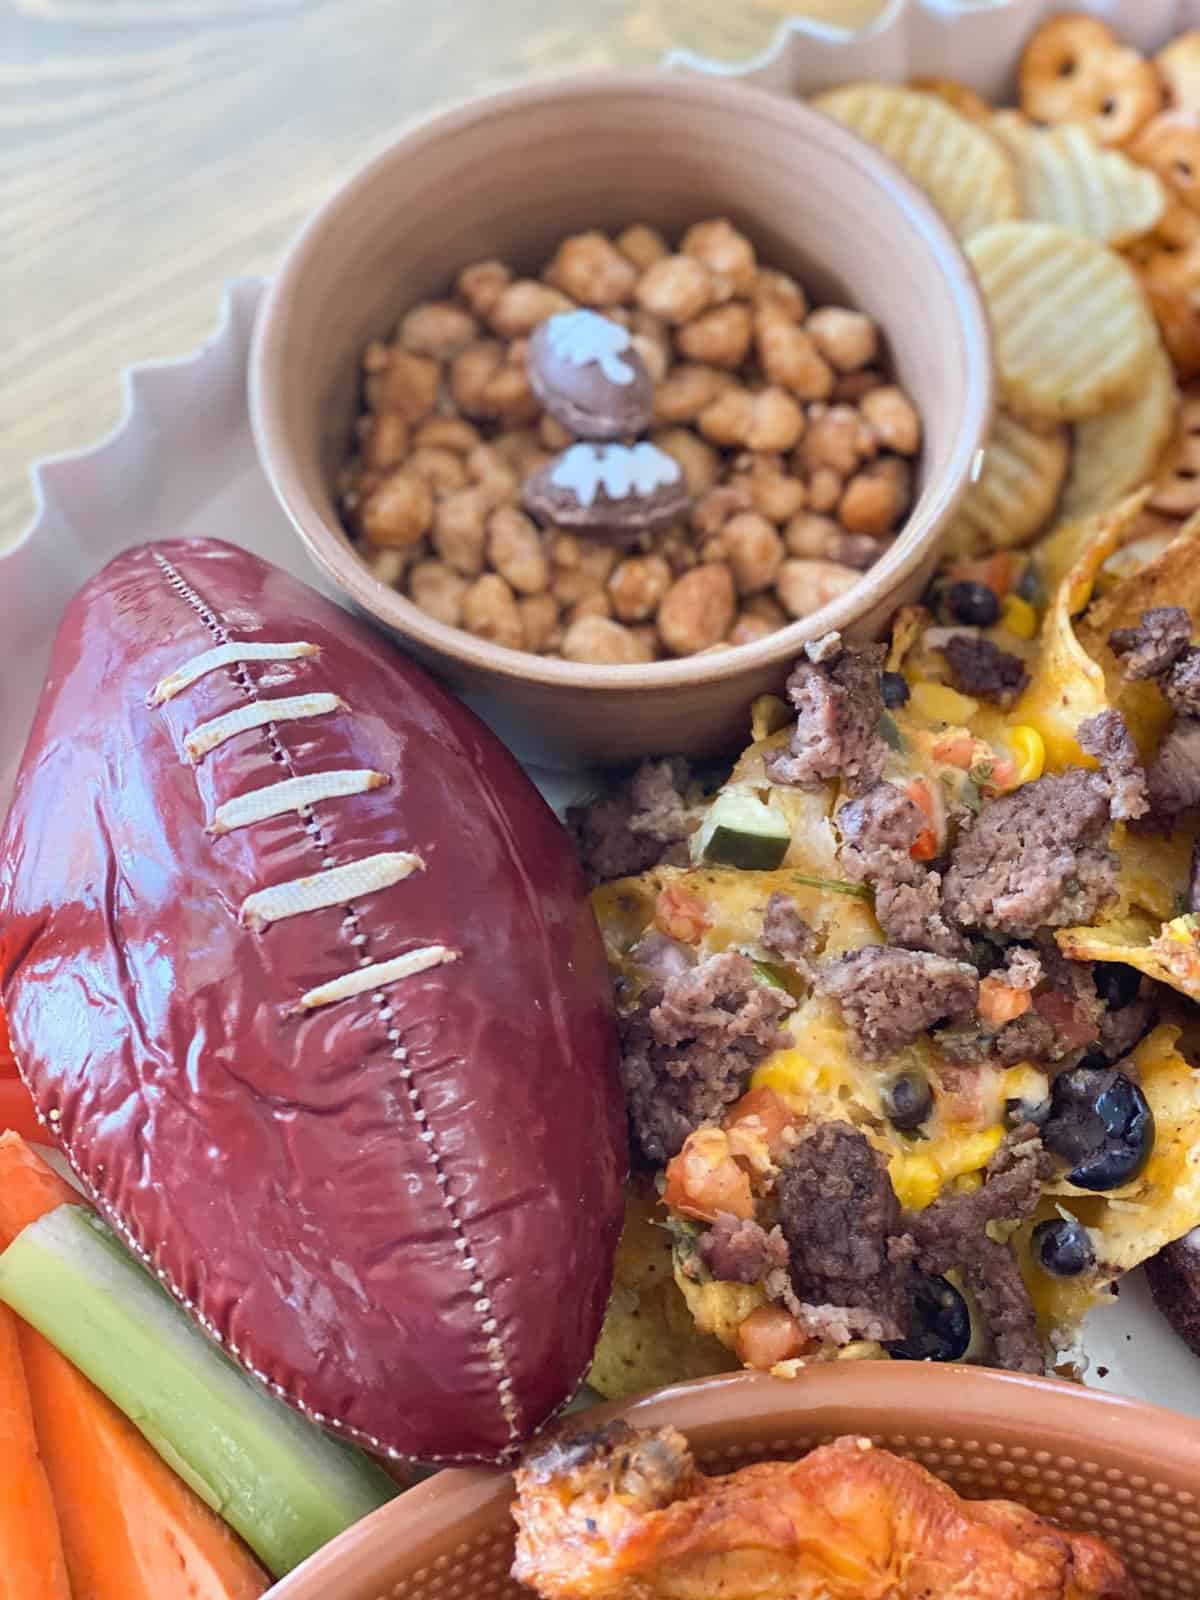 Super Bowl charcuterie board with football summer sausage and more